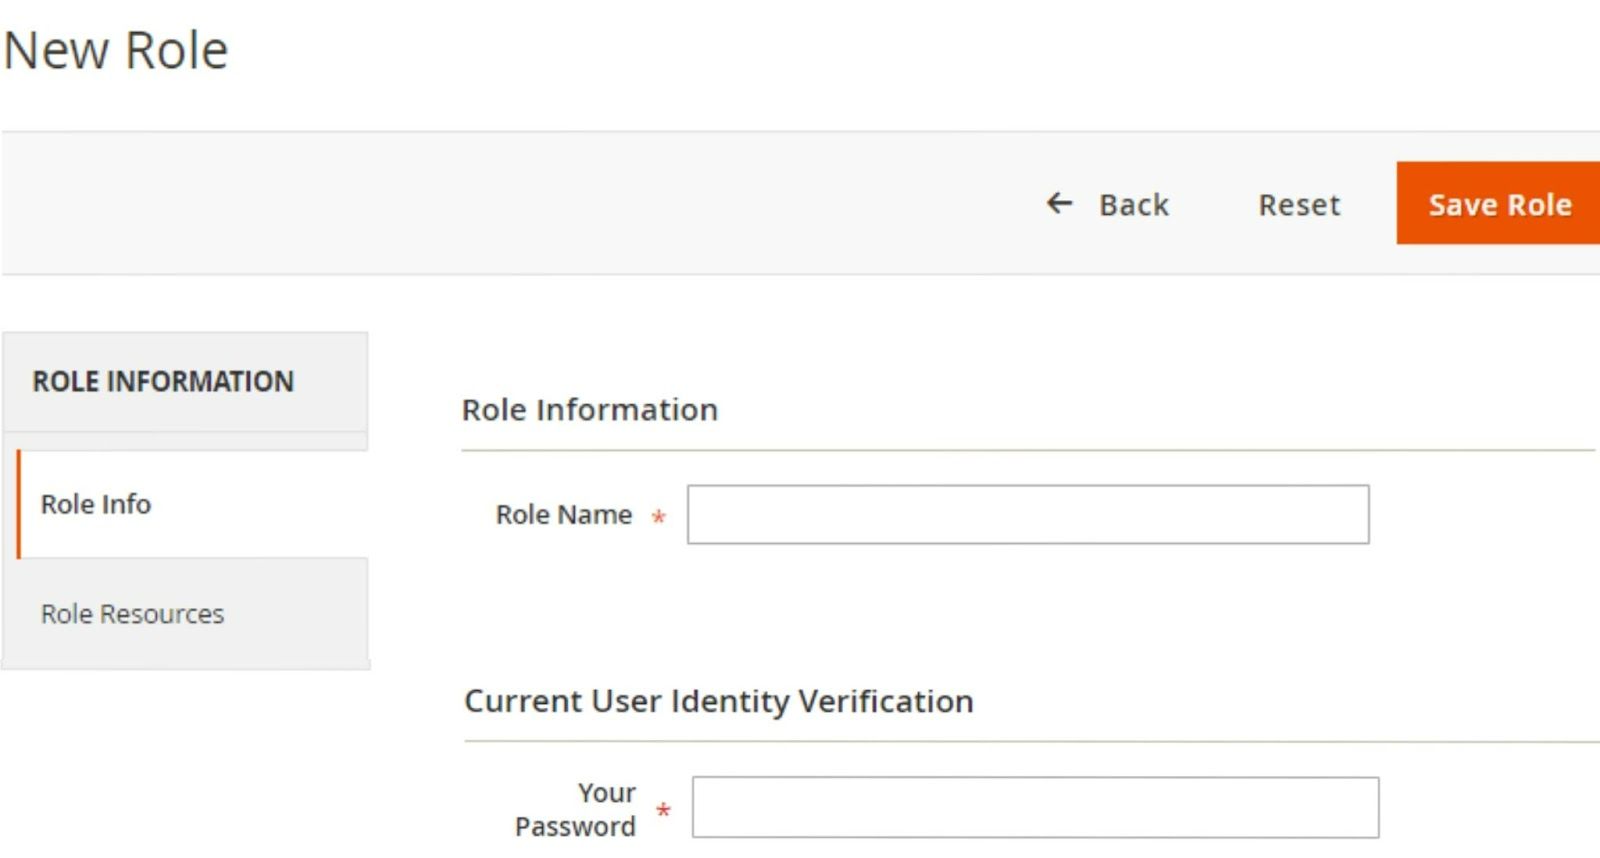 Click on the Add New Role button to add a new user role. Under Role Information, enter the name of the user role in the Role Name field and enter the current password of a user you are currently logged in as in the Your Password field.